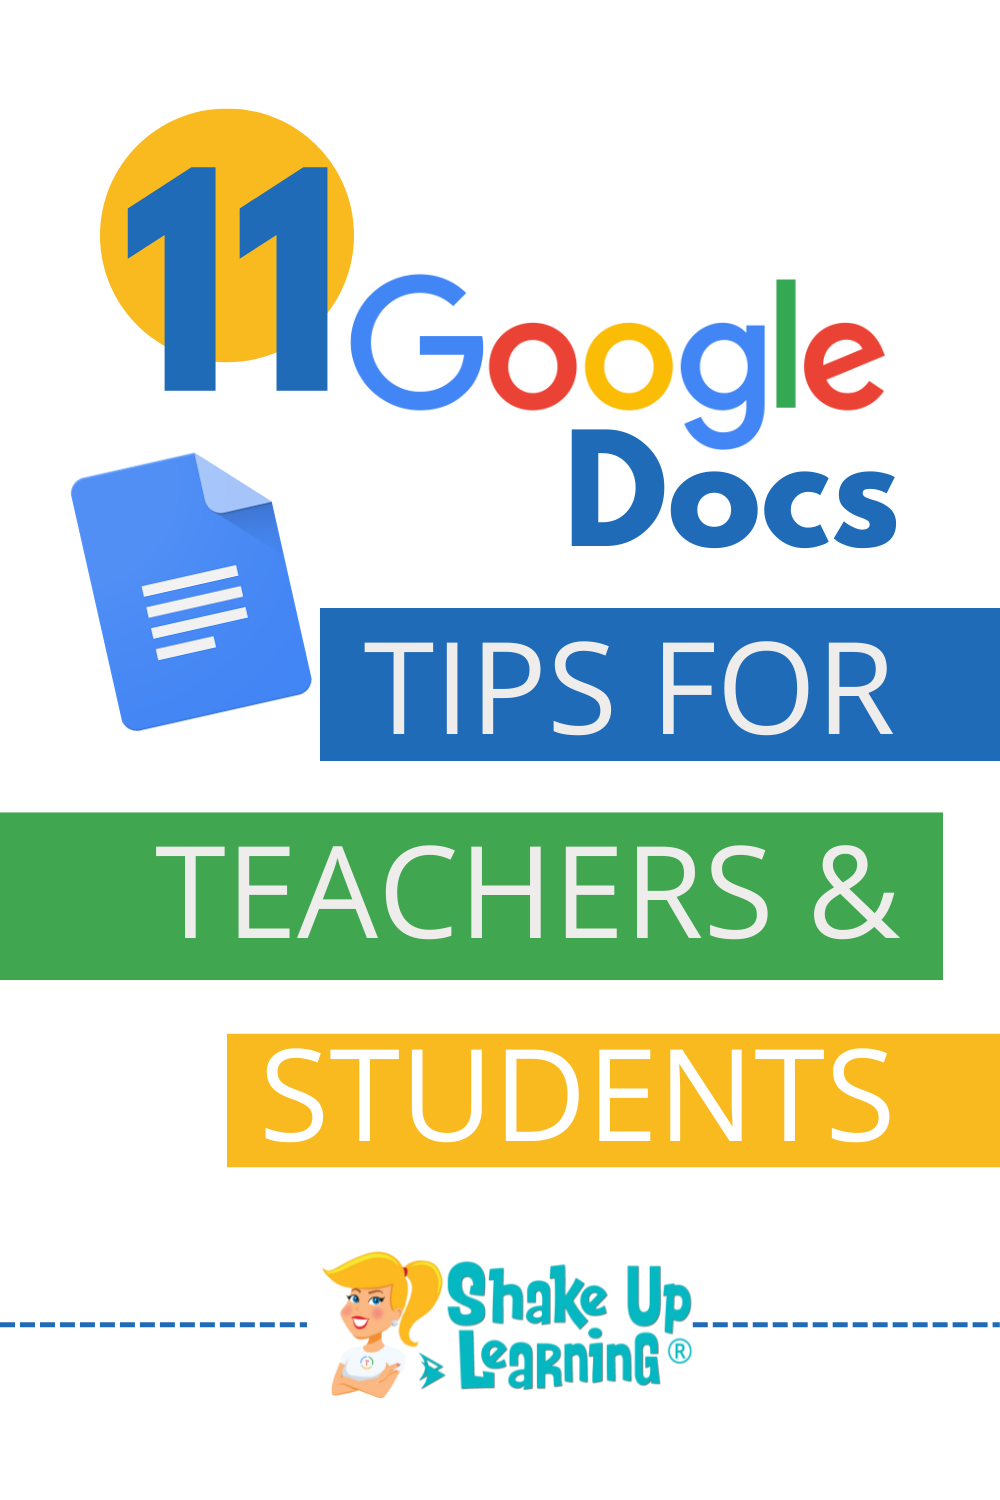 11 Google Docs Tips for Teachers and Students –
SULS0166